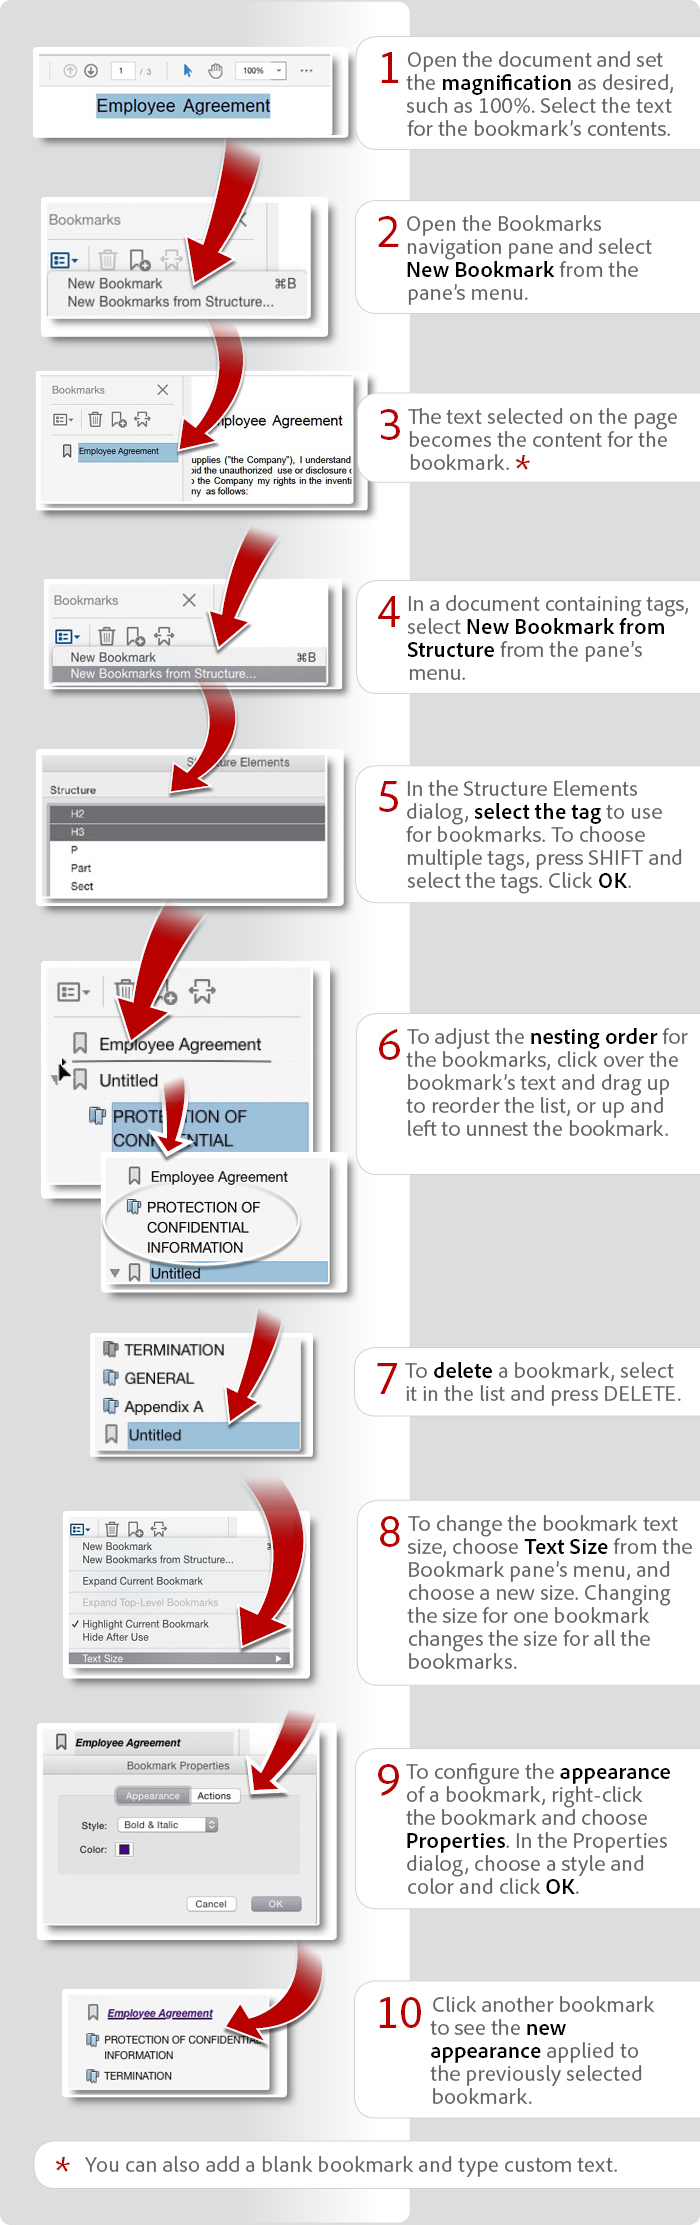 How to create and add bookmarks using Acrobat DC